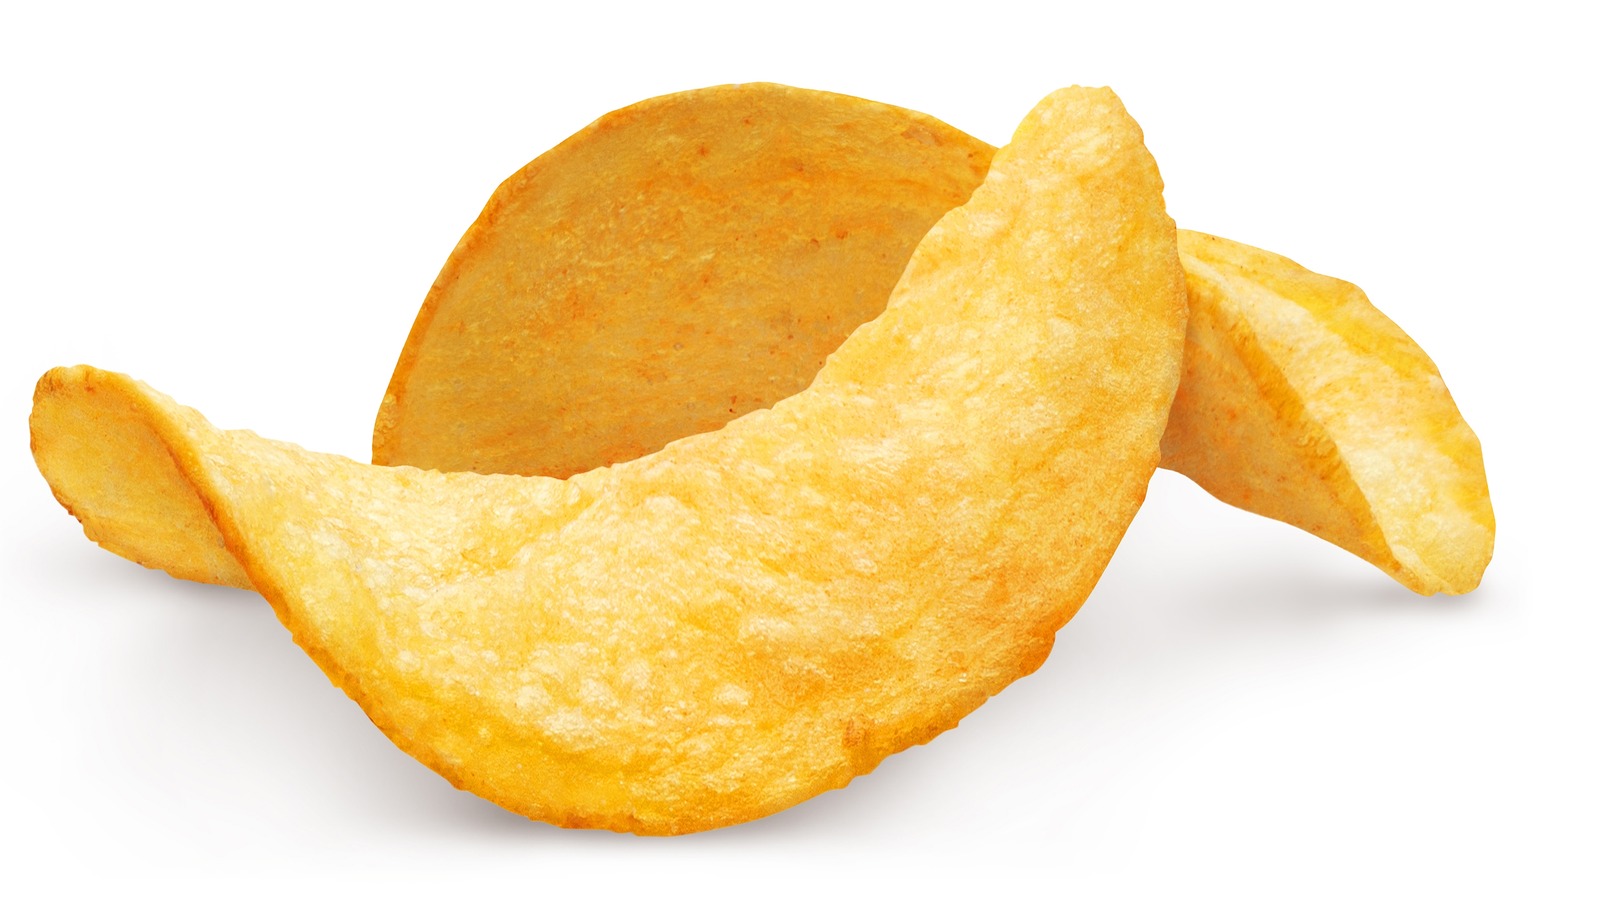 Pringles Hard-Launches New Takis-Inspired Chip Flavors